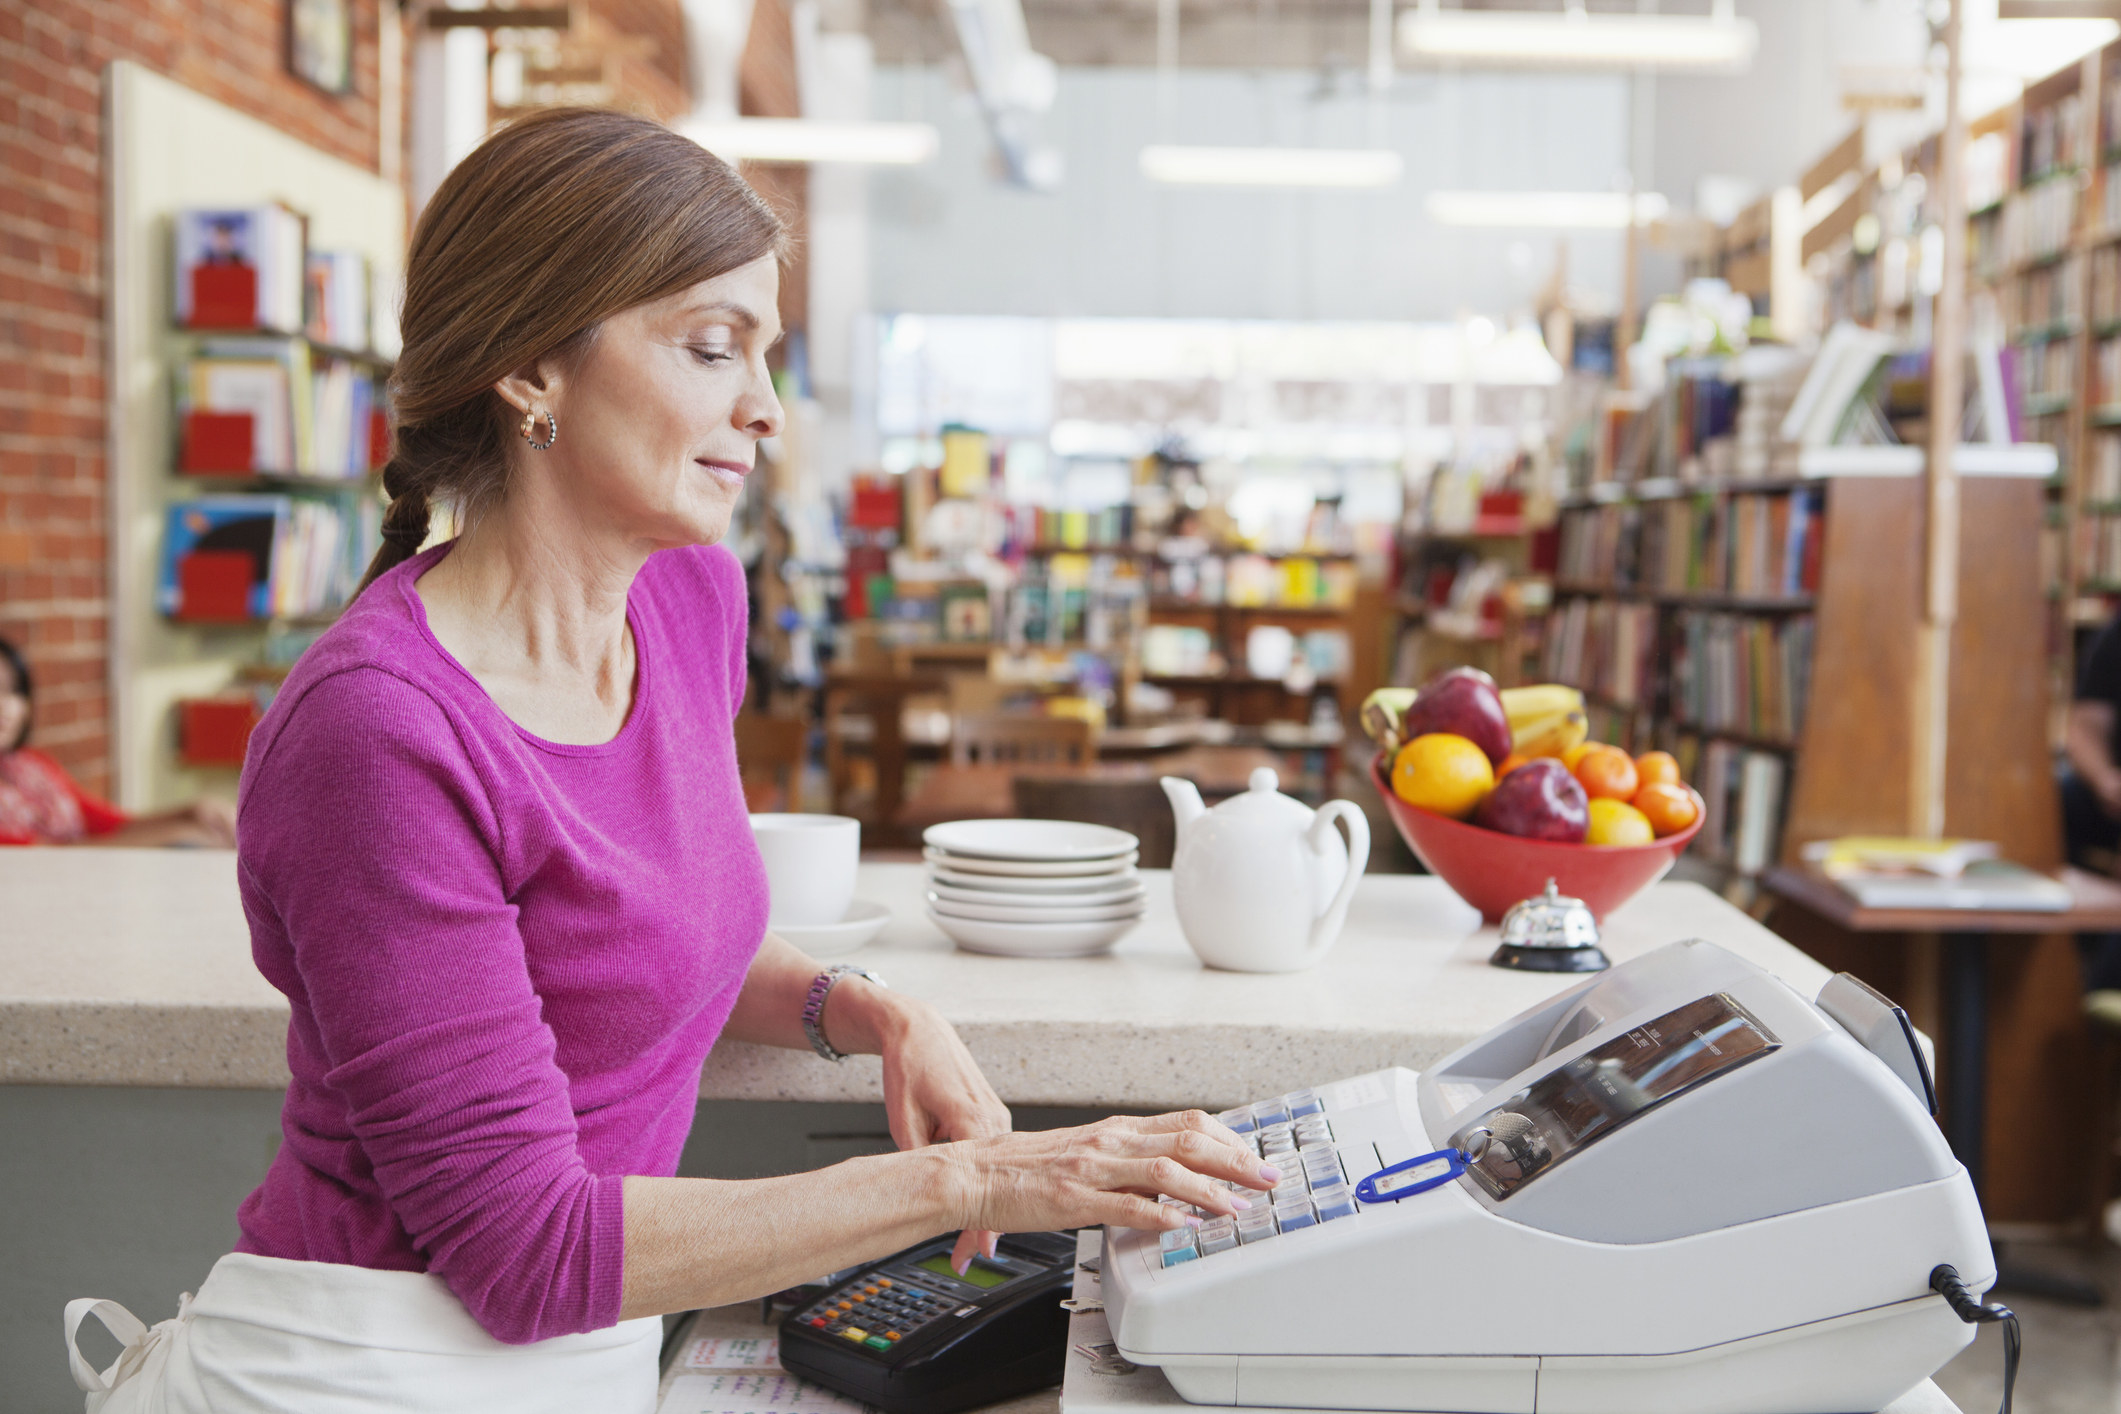 Woman working at a cash register